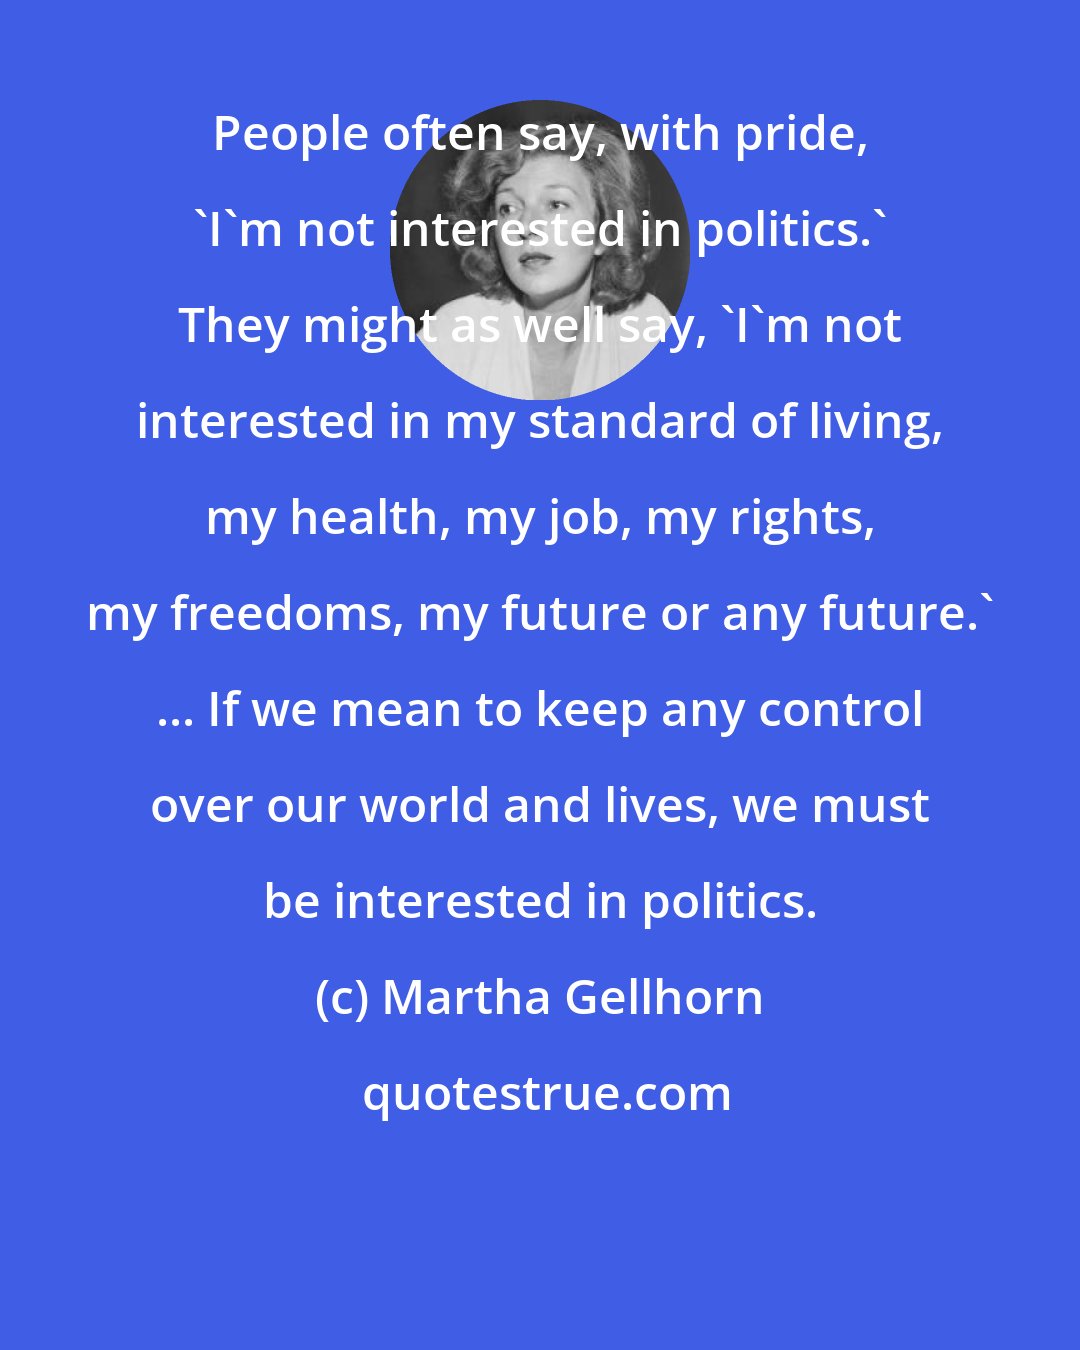 Martha Gellhorn: People often say, with pride, 'I'm not interested in politics.' They might as well say, 'I'm not interested in my standard of living, my health, my job, my rights, my freedoms, my future or any future.' ... If we mean to keep any control over our world and lives, we must be interested in politics.